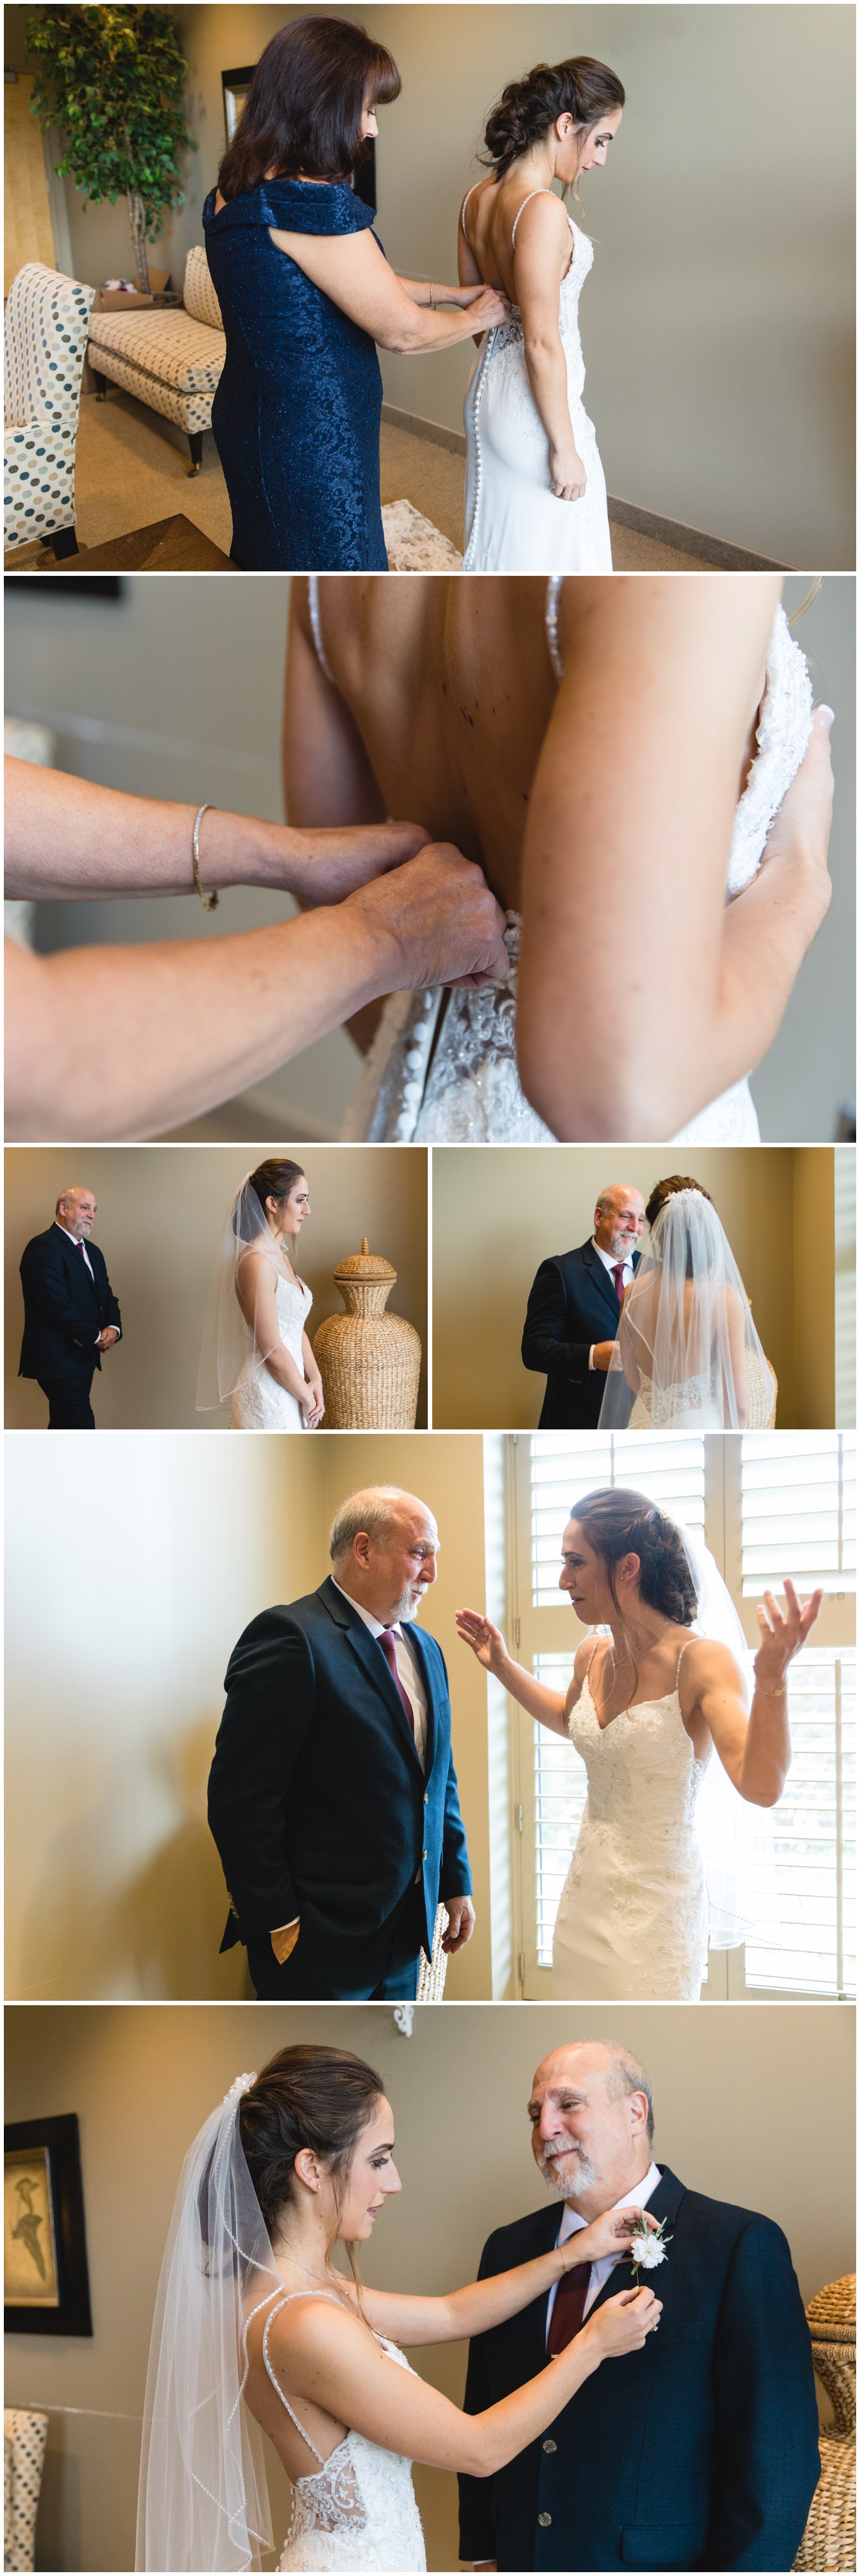 bride's mom putting on her dress and then seeing her dad for the first time